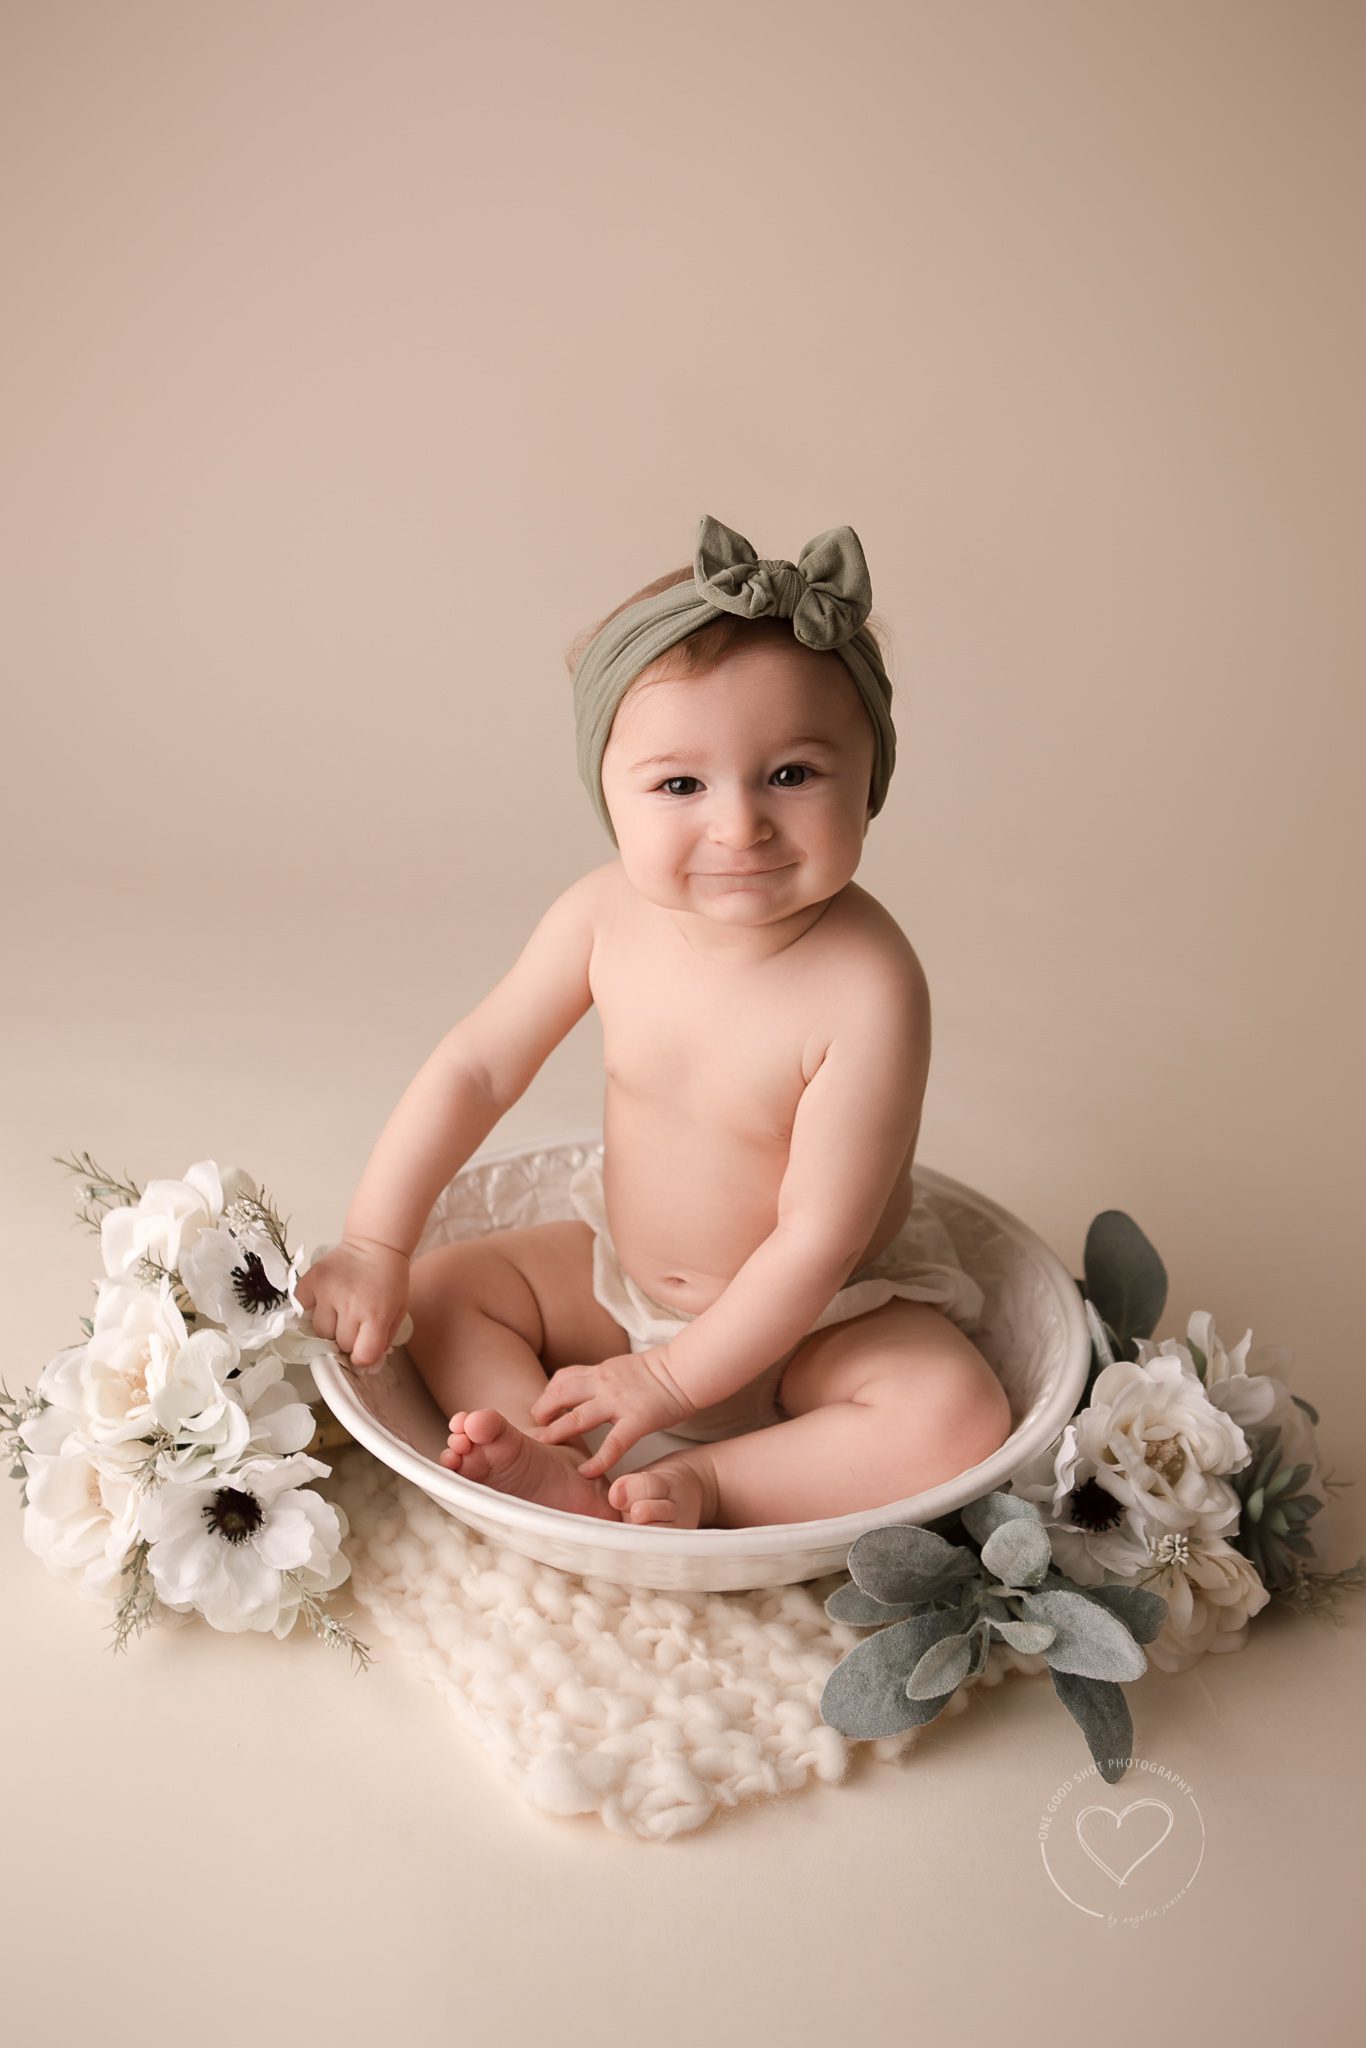 6 Month old, Baby Girl, Milestone session, sitting in a bowl surrounded with white flowers, smiling at camera, wearing green bow